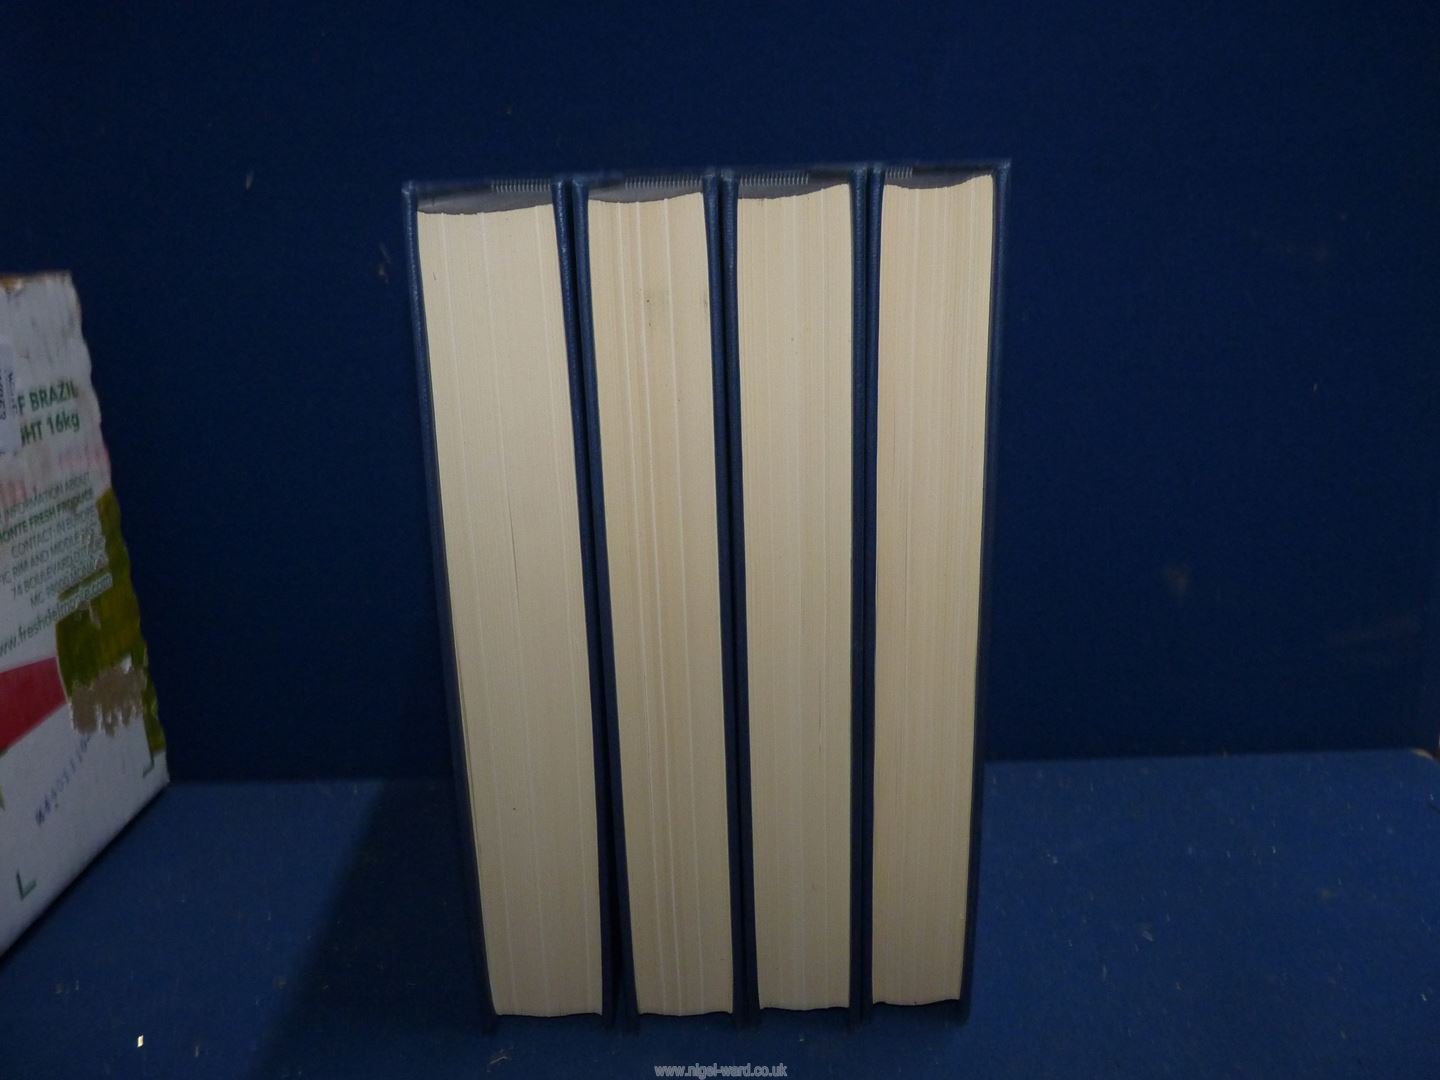 Four volumes of A History of The English Speaking People by Winston S. - Image 6 of 7